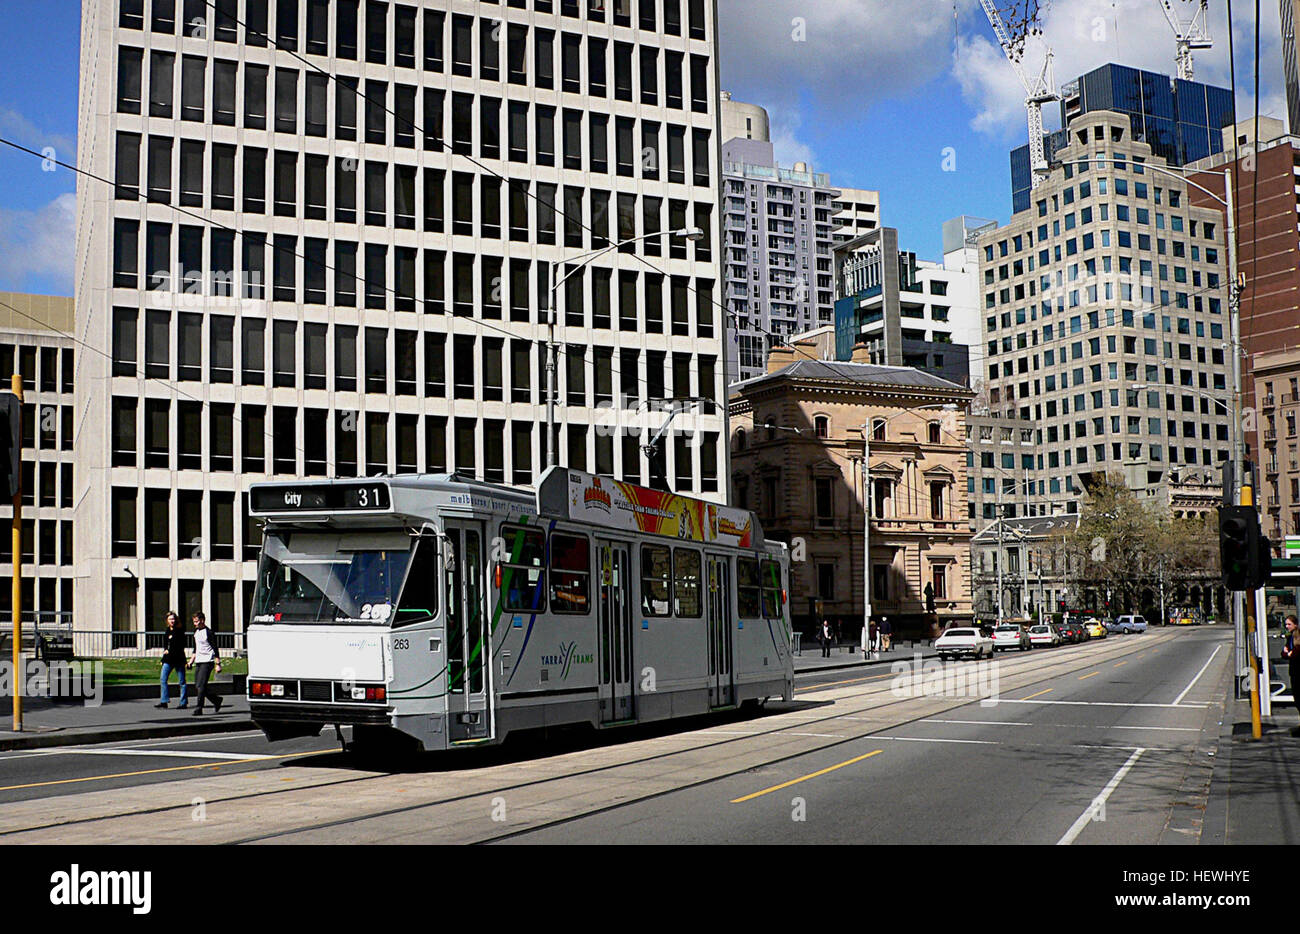 The Melbourne tramway network is a major form of public transport in Melbourne, the capital city of the state of Victoria, Australia. As of June 2011, the network consisted of 250 km (155.3 mi) of track, 487 trams, 30 routes, and 1,763 tram stops. It is the largest urban tramway network in the world,] ahead of the networks in St. Petersburg (240 km (150 mi)), Berlin (190 km (120 mi)), Moscow (181 km (112 mi)) and Vienna (172 km (107 mi)). Trams are the second most used form of public transport in overall boardings in Melbourne after the commuter railway network, with a total of 182.7 million p Stock Photo